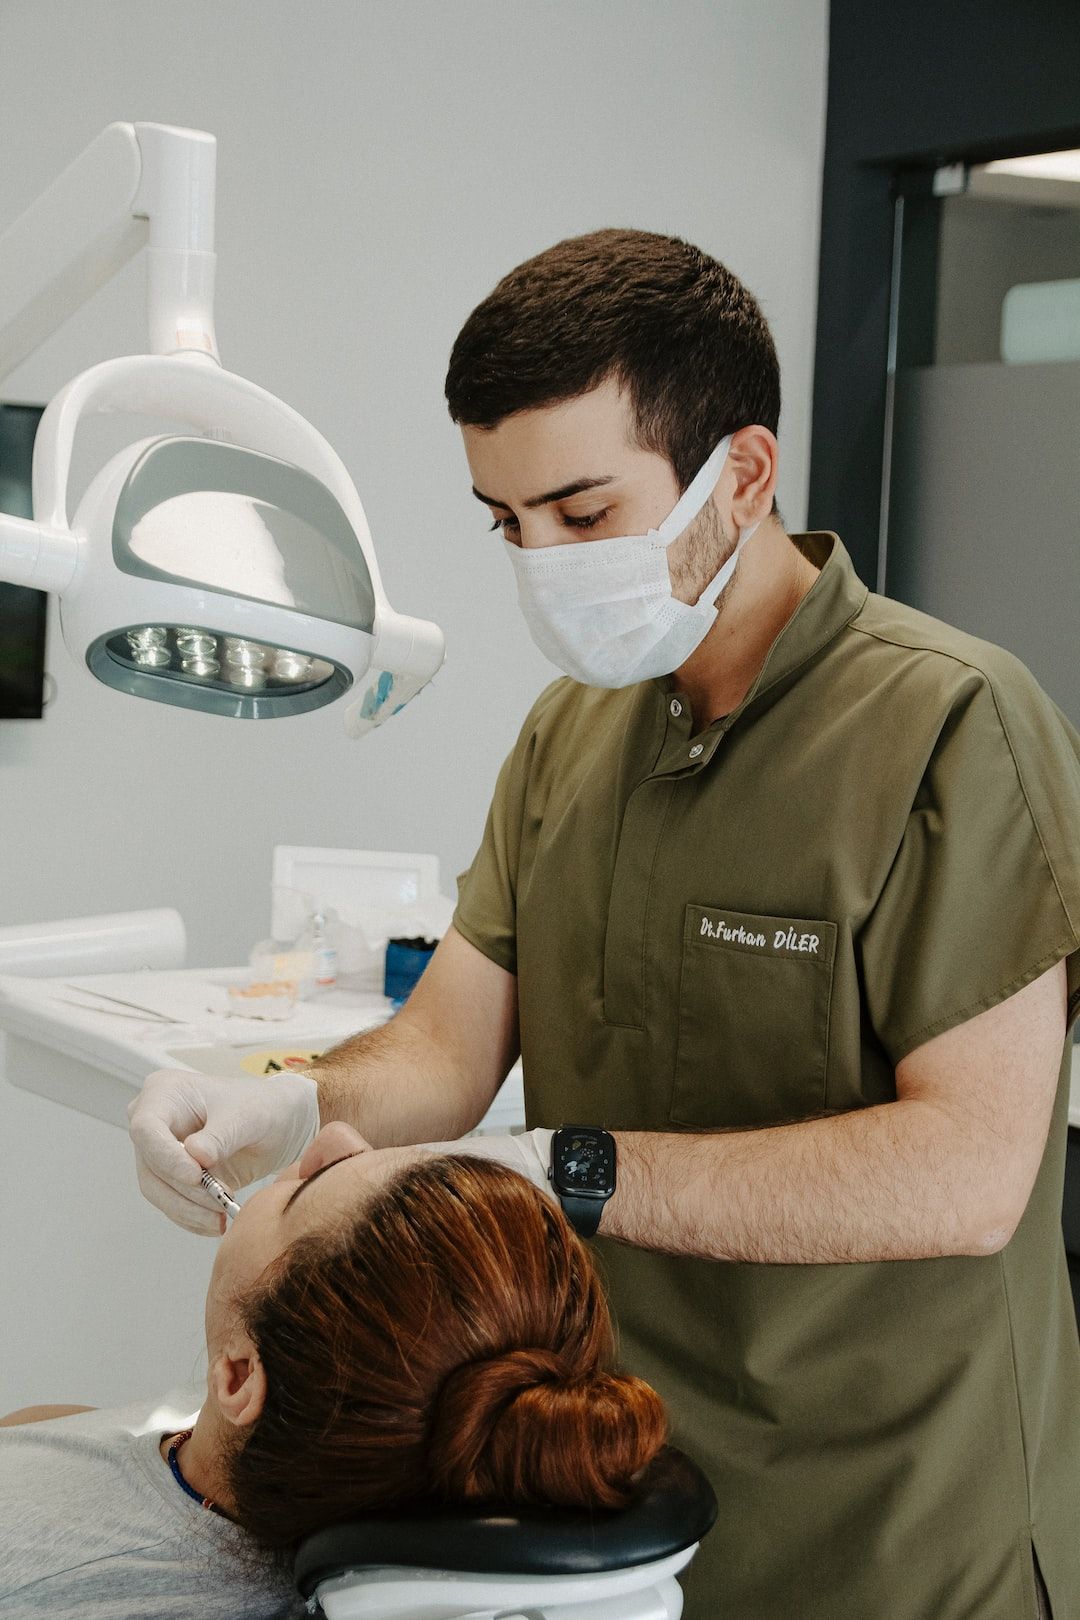 dentist working on patient's mouth